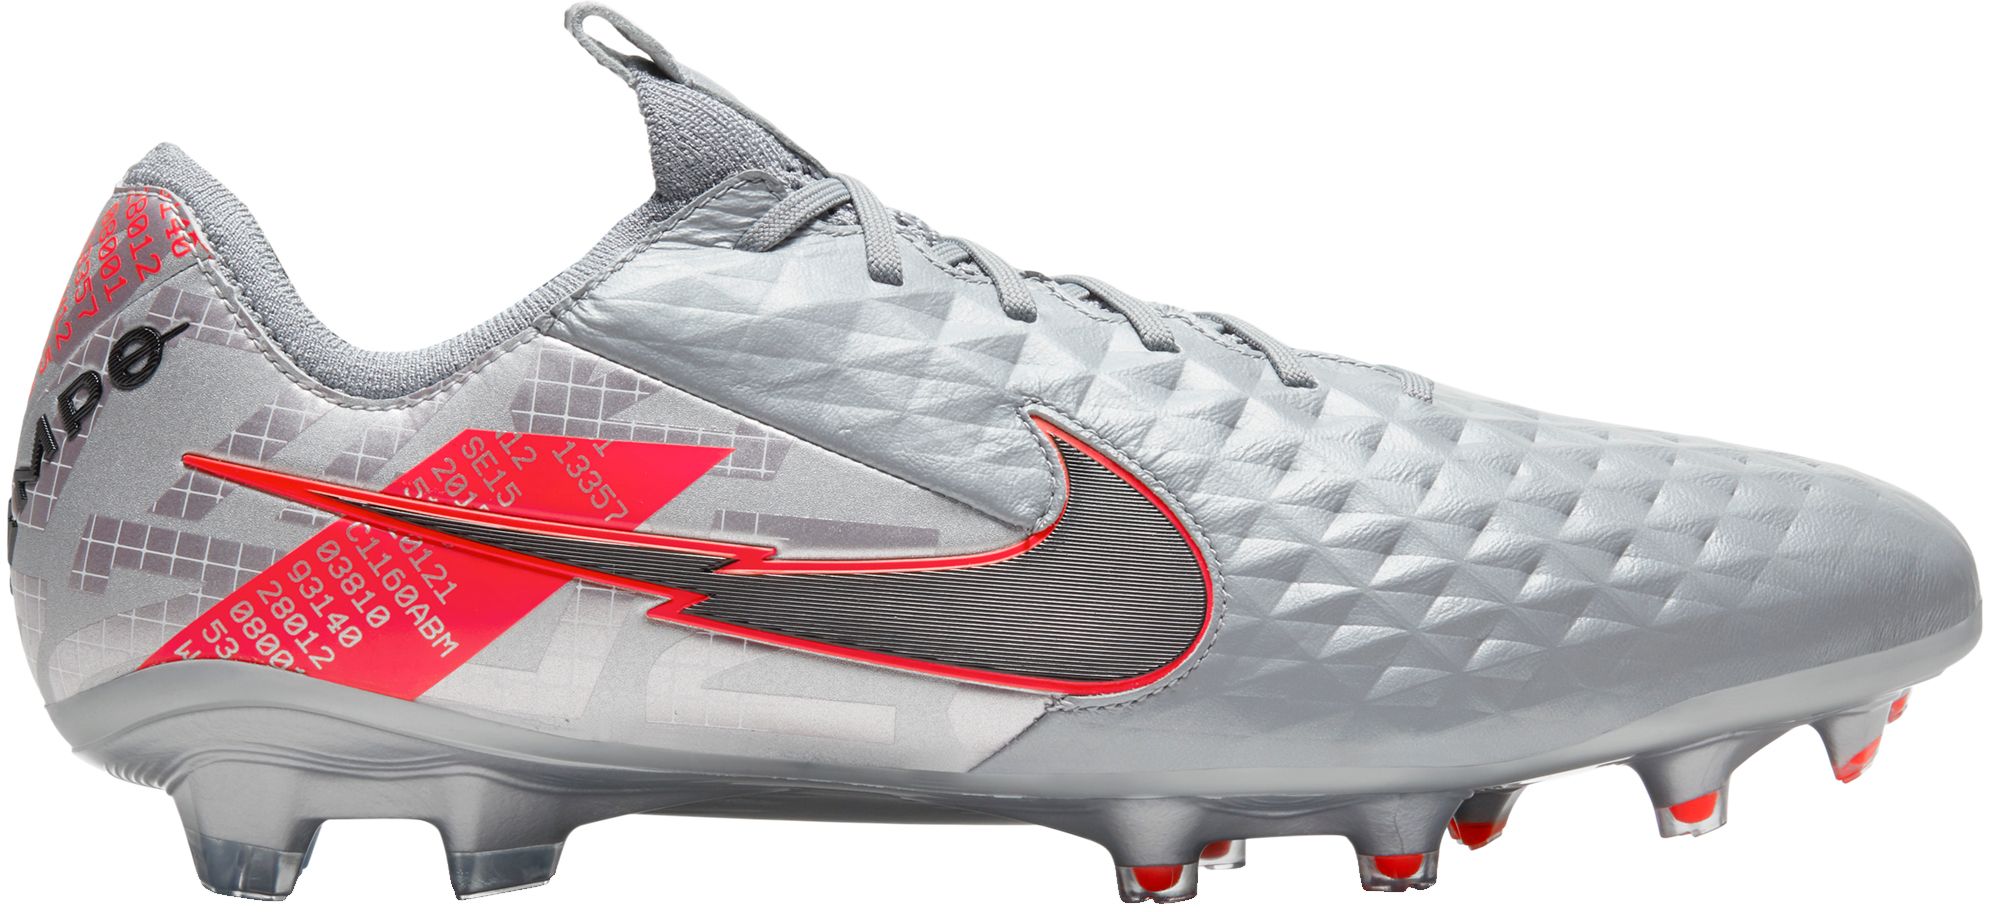 tempos cleats